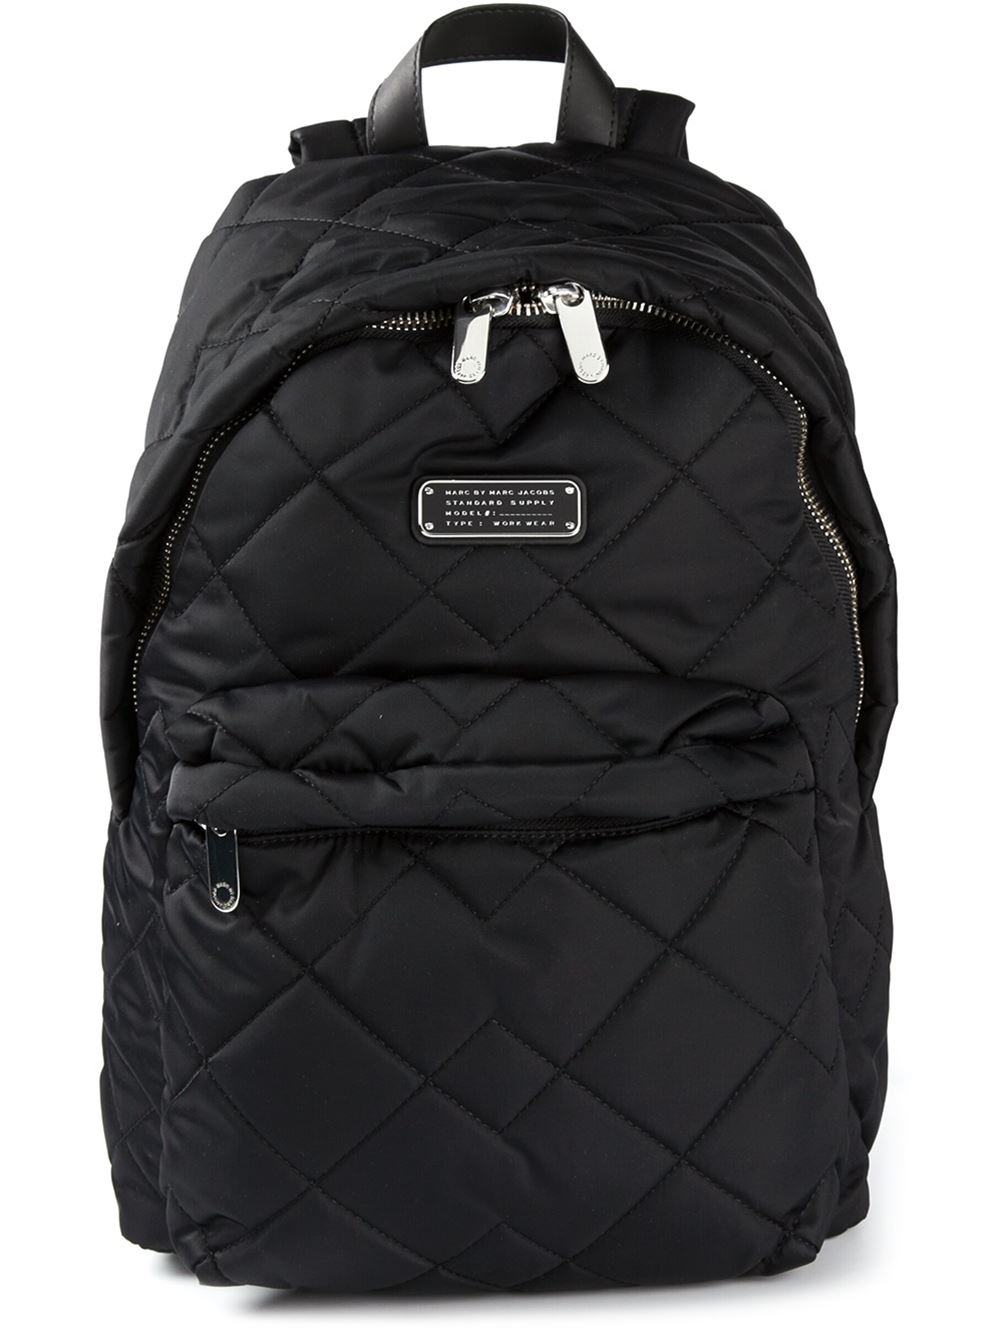 Marc by marc jacobs 'crosby' Quilted Backpack in Black | Lyst